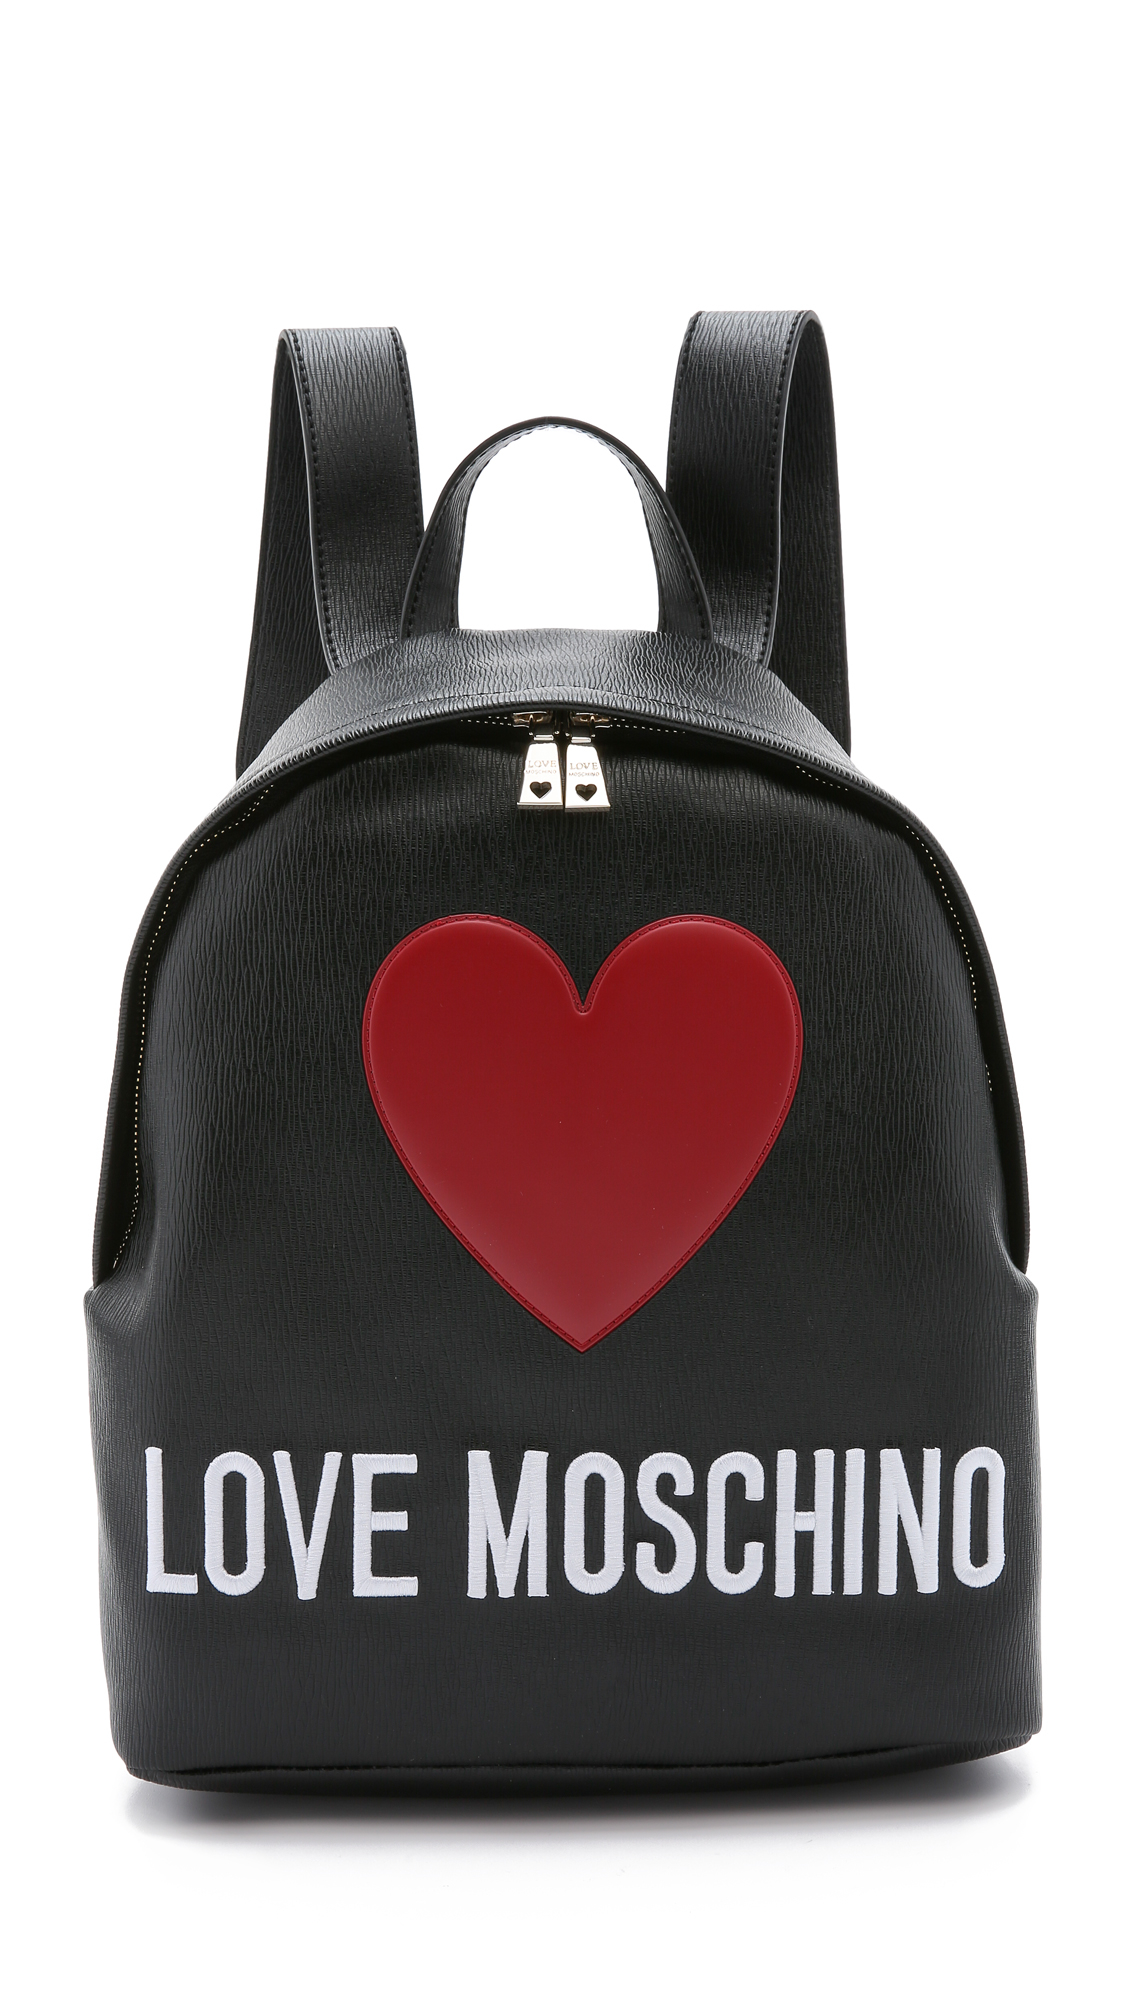 Boutique Moschino Love Moschino Backpack in Black | Lyst